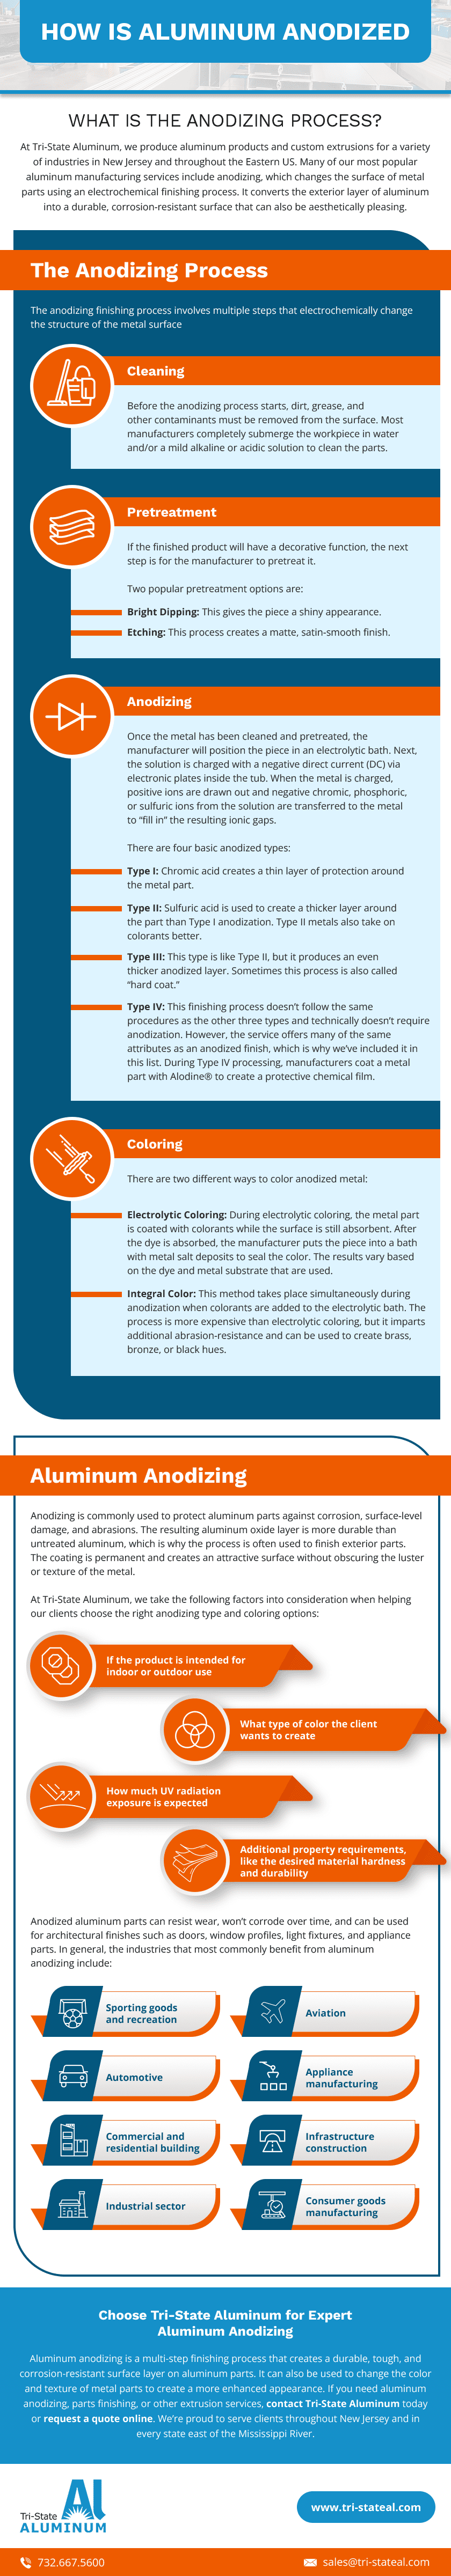 How is Aluminum Anodized